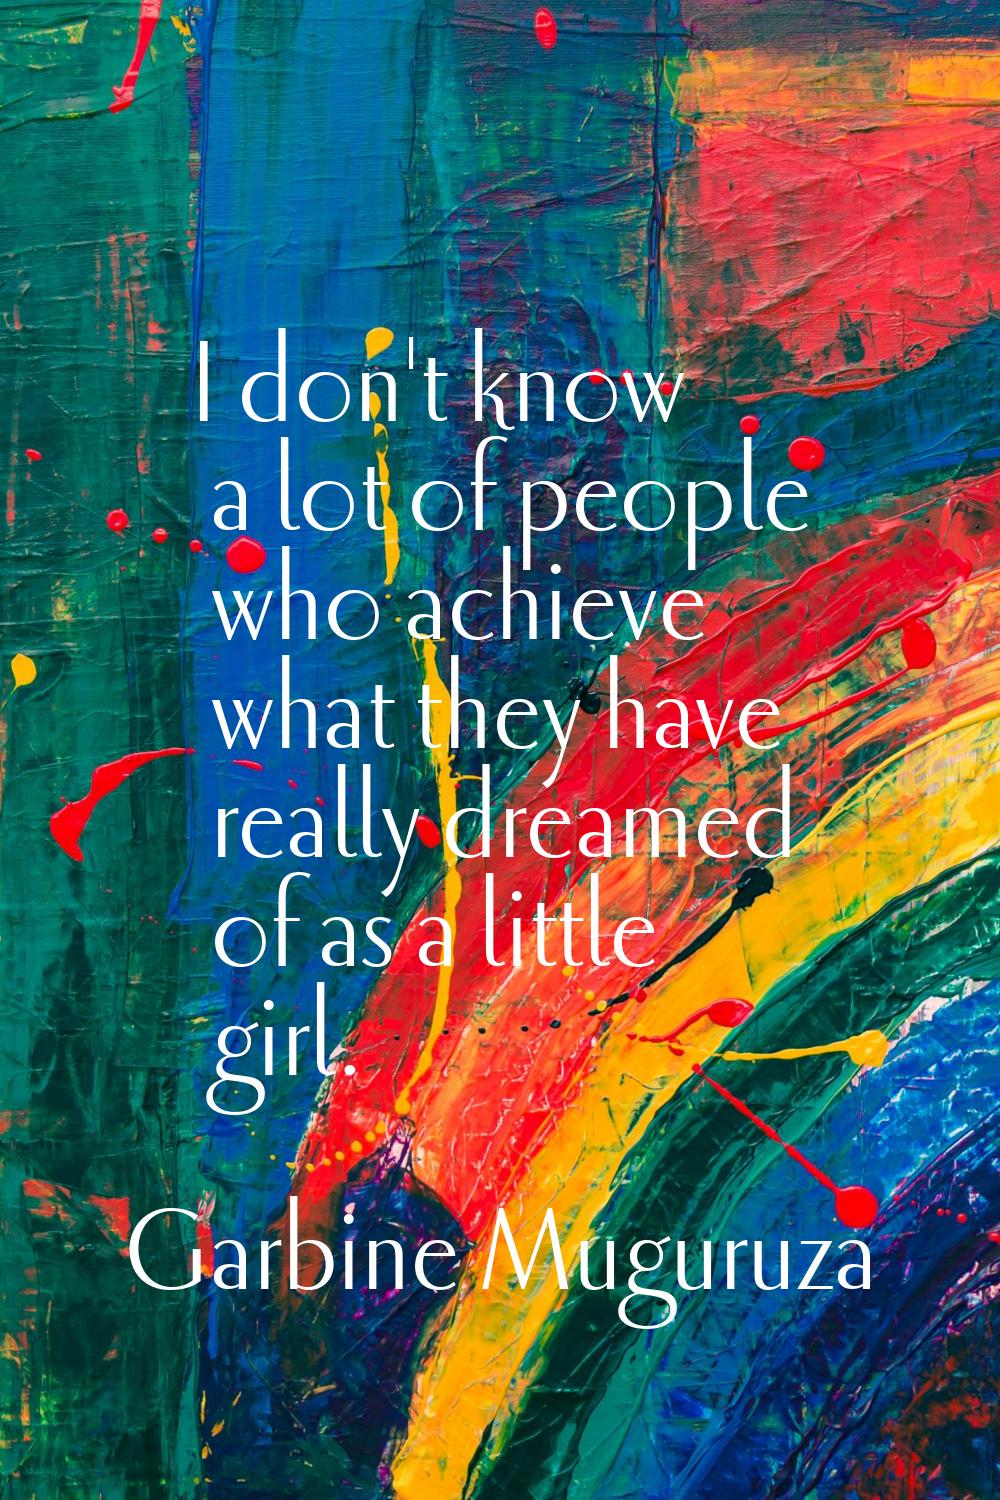 I don't know a lot of people who achieve what they have really dreamed of as a little girl.